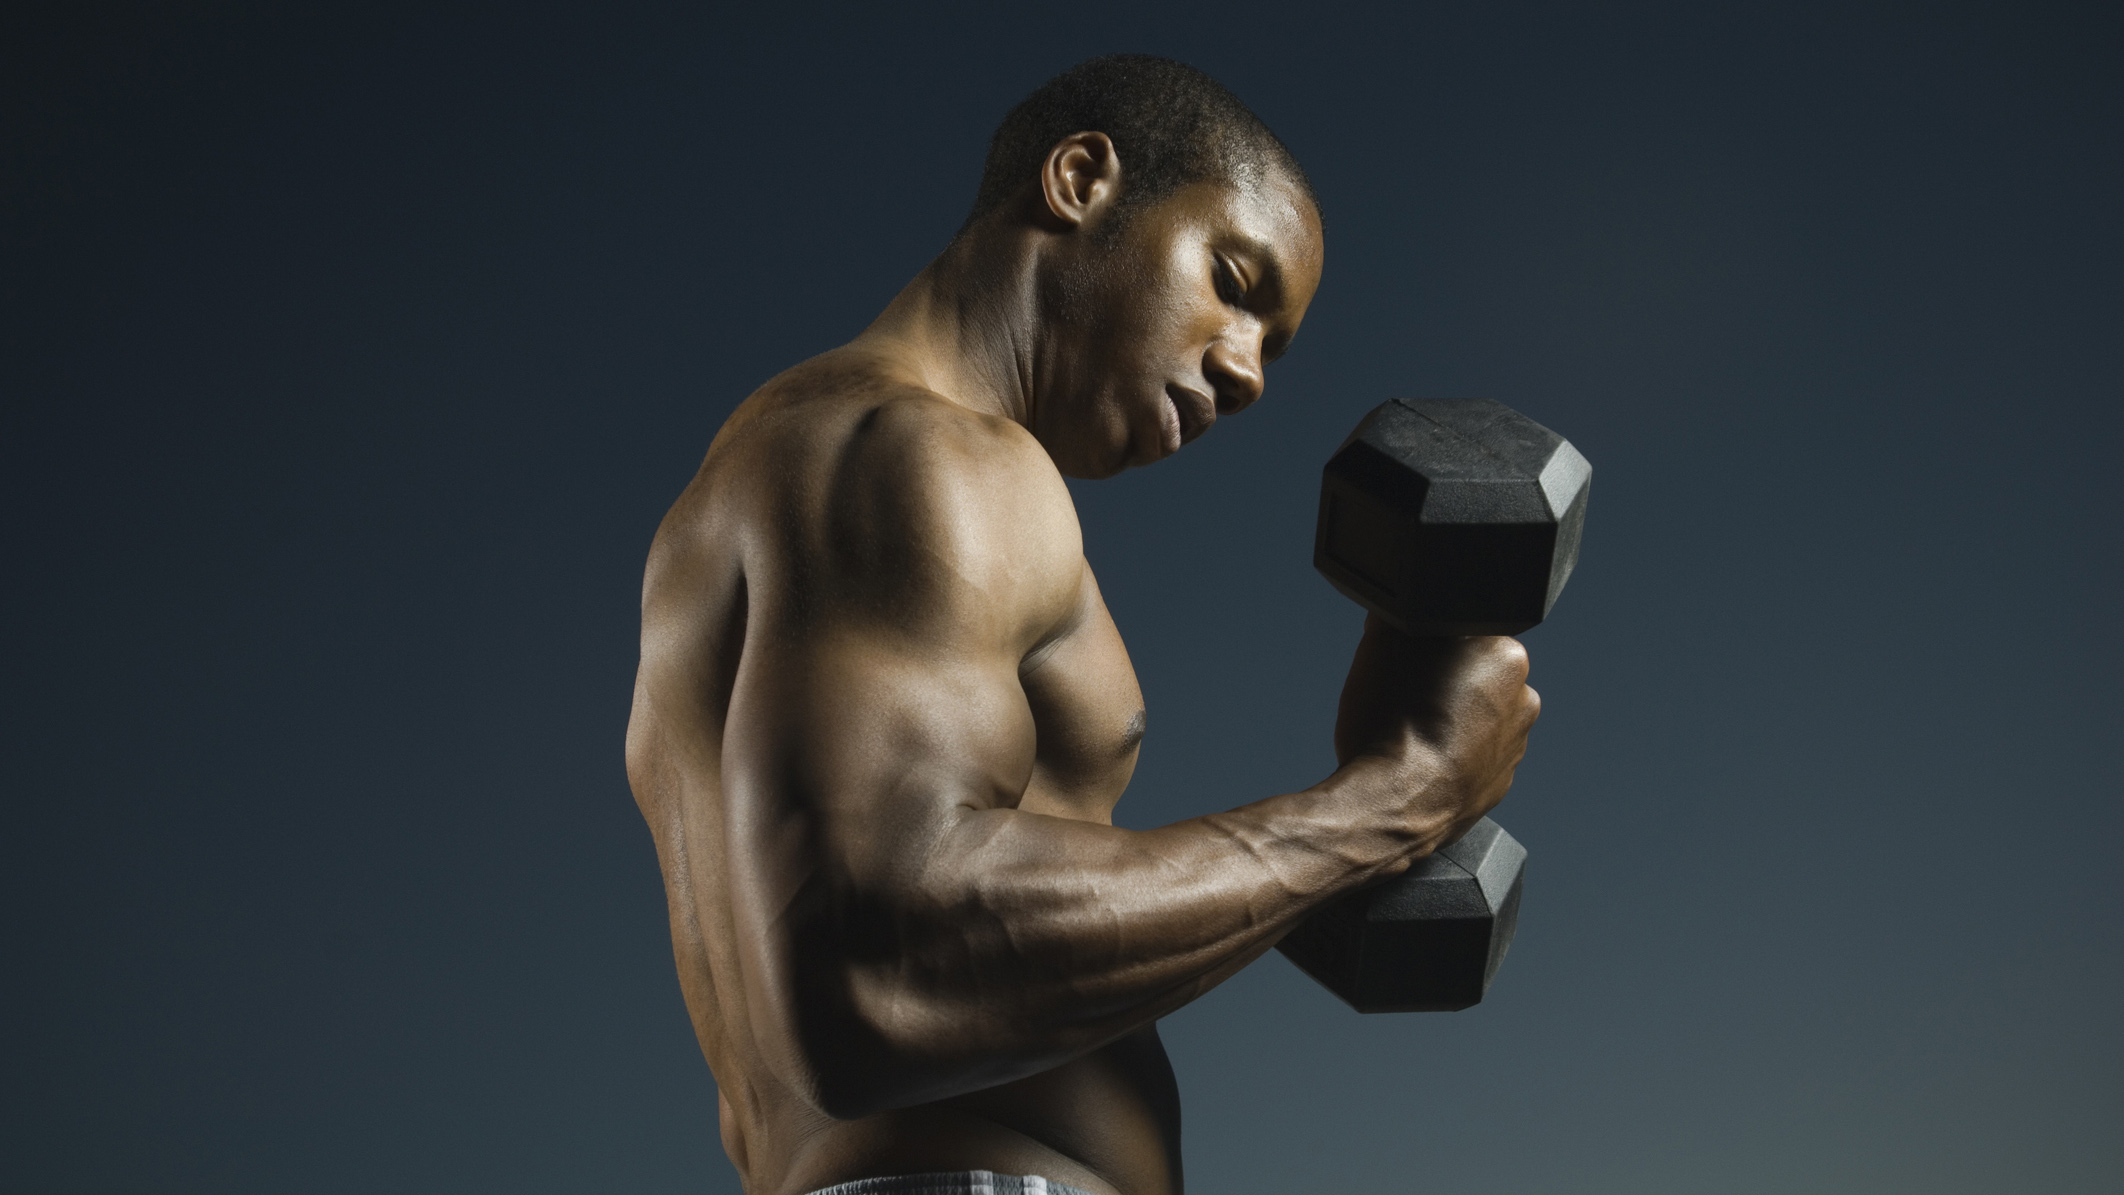 Get Bigger Arms With This Simple Workout